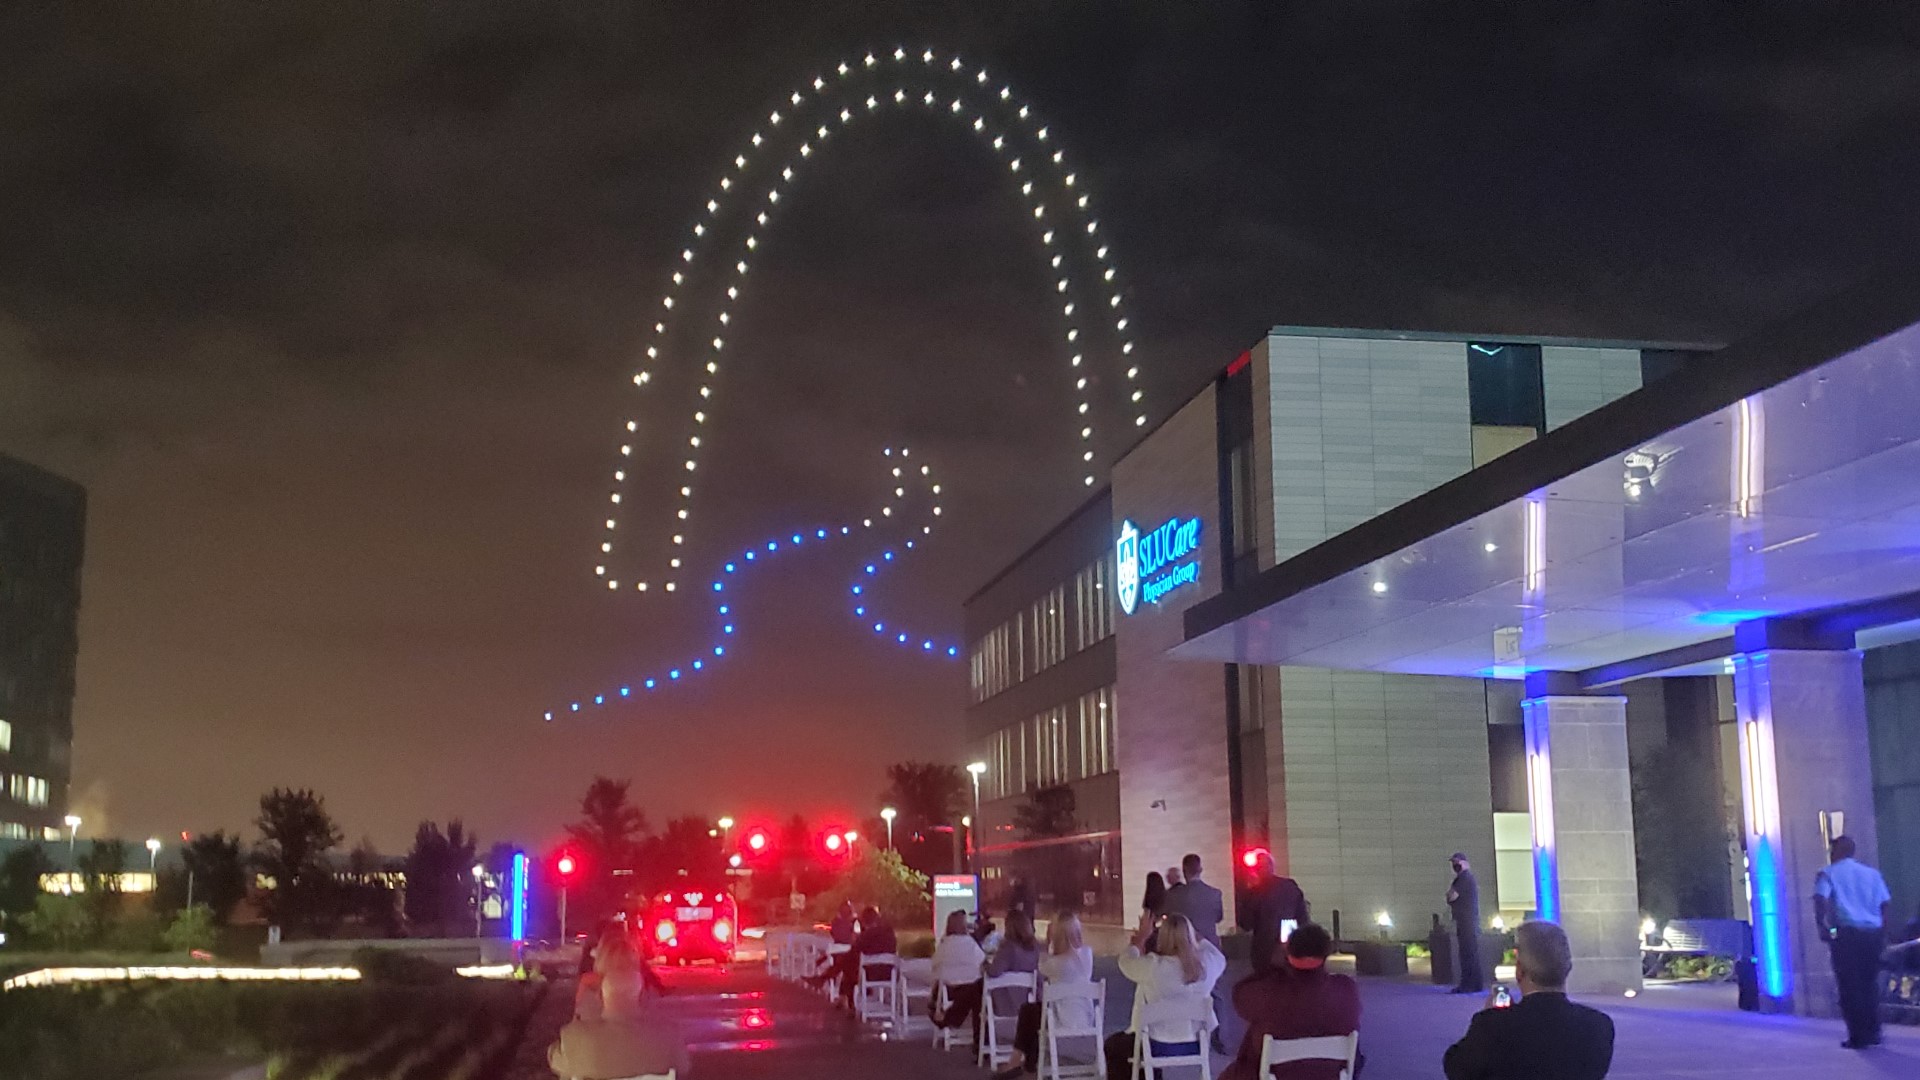 SSM Health Saint Louis University Hospital cut the ribbon its brand new facility Tuesday. The event included a first-of-its-kind drone show.